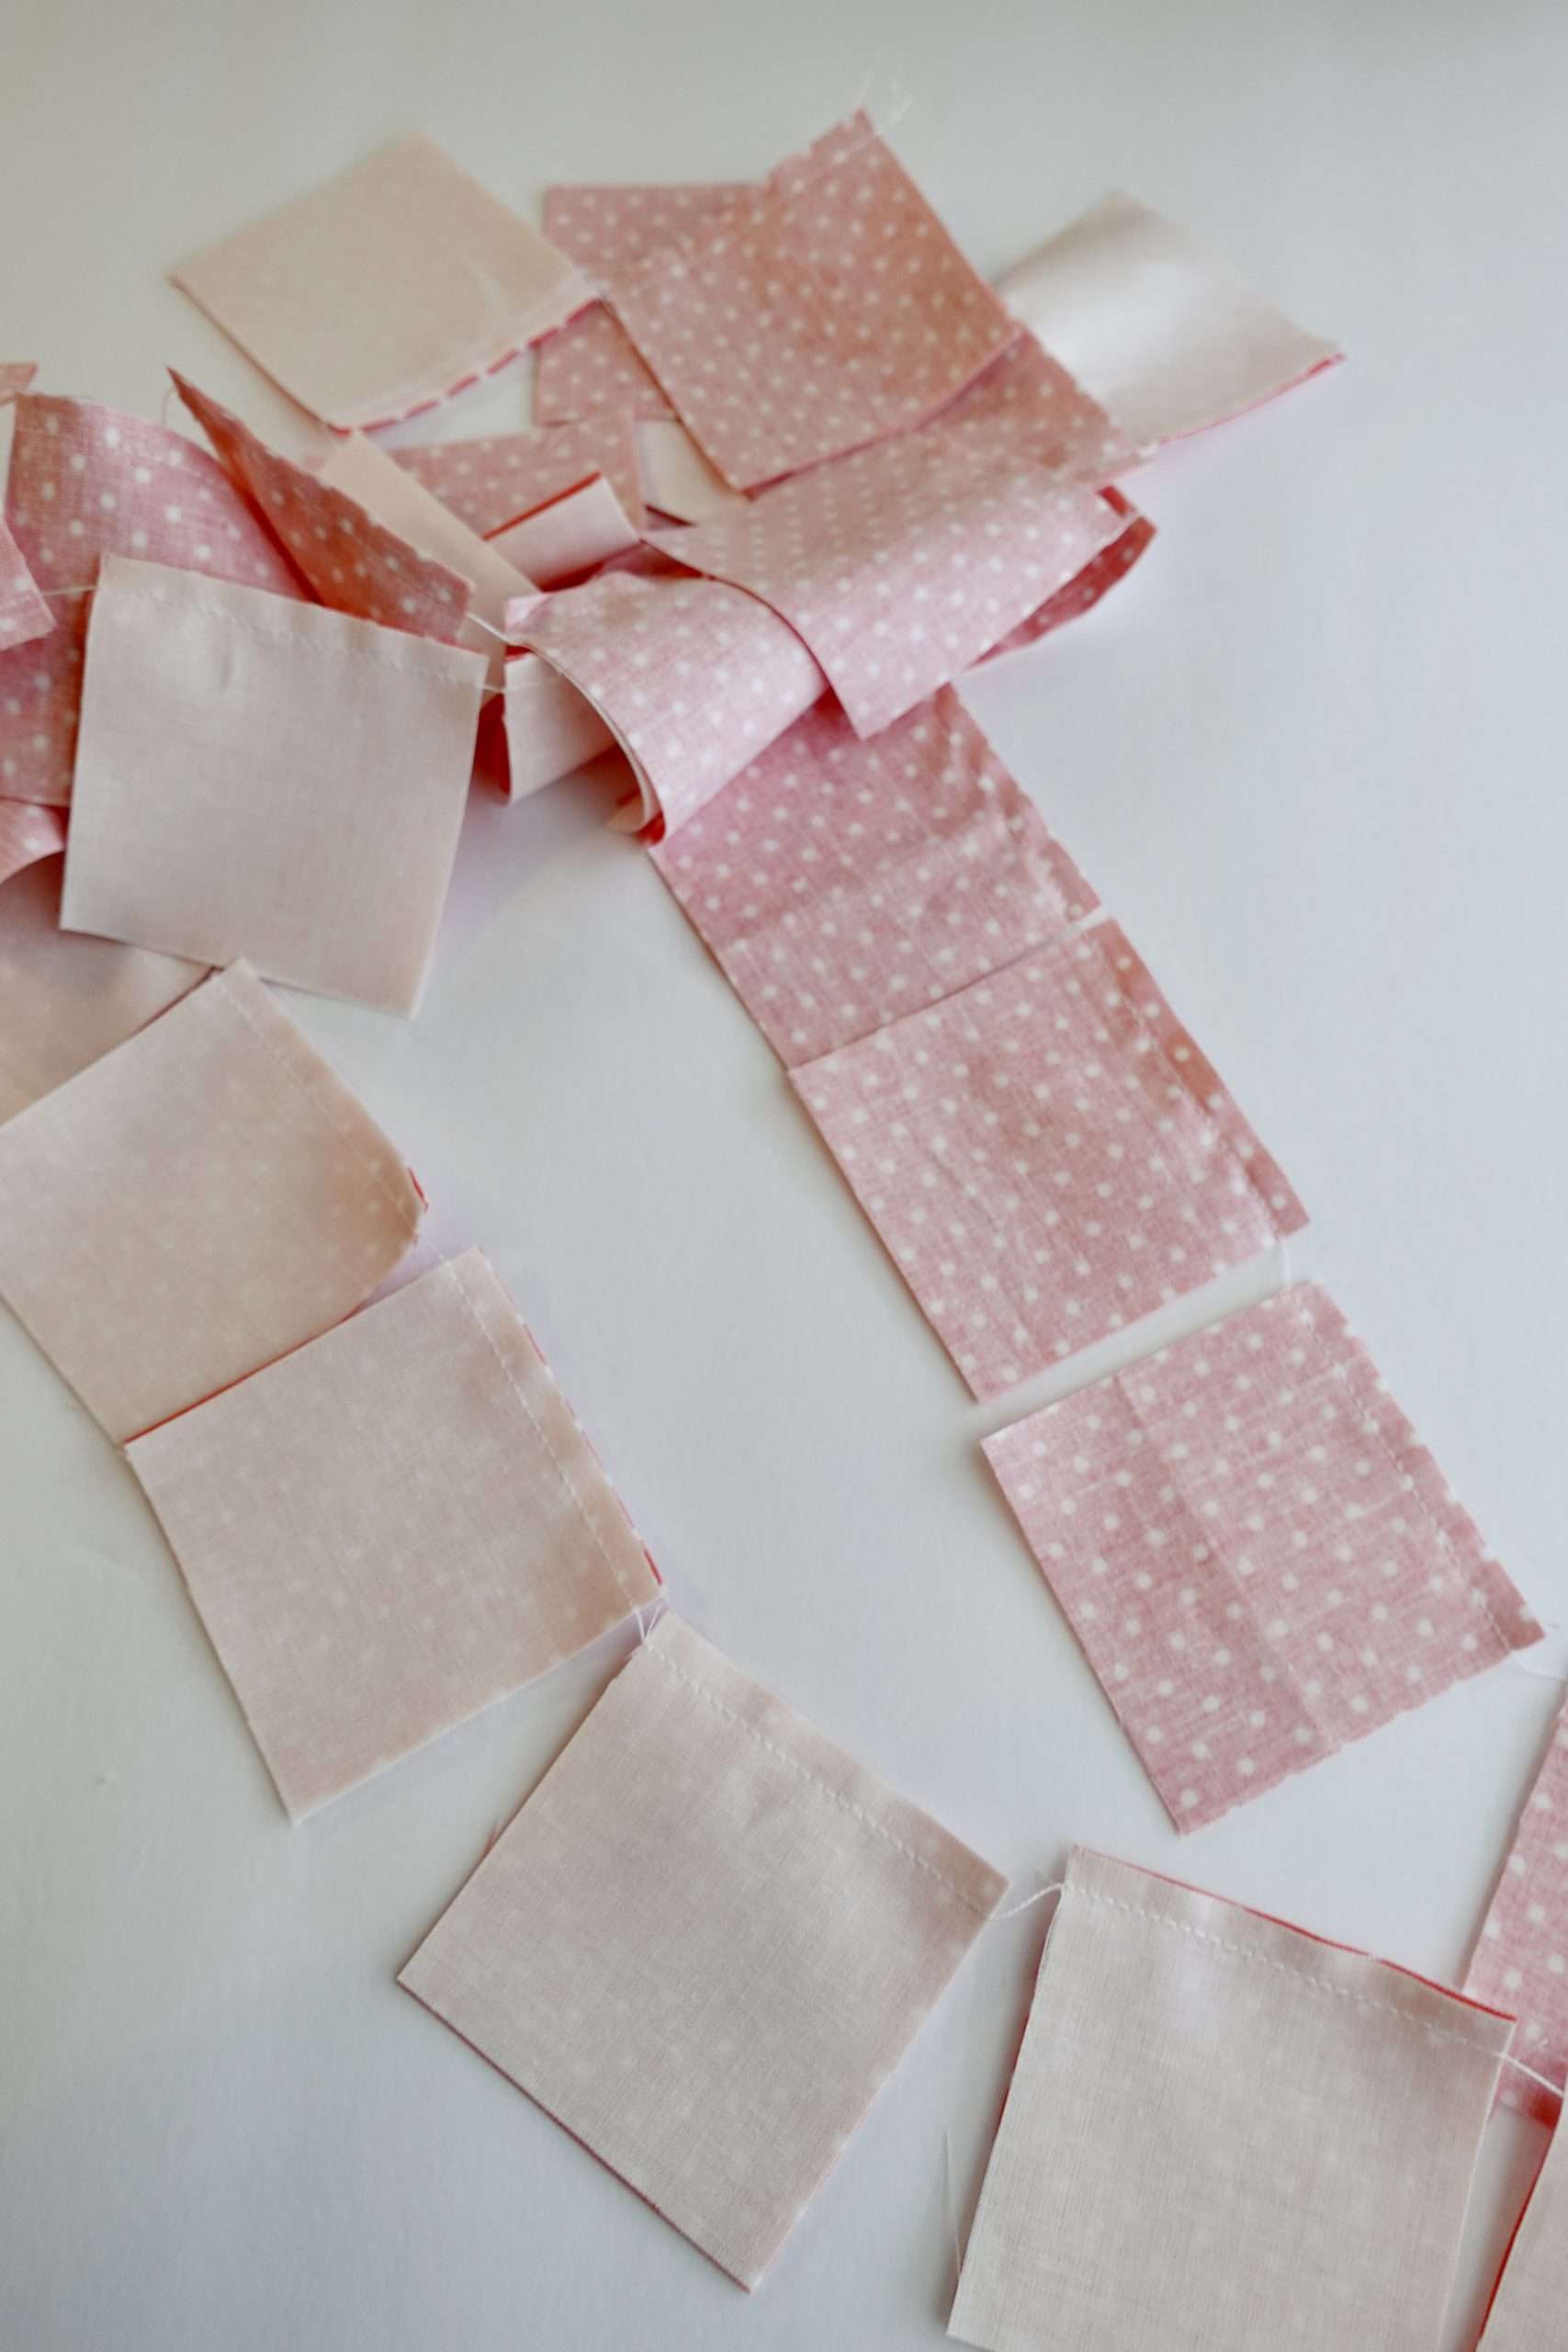 A Beginner’s Chain Sewing Guide to Quick Piecing